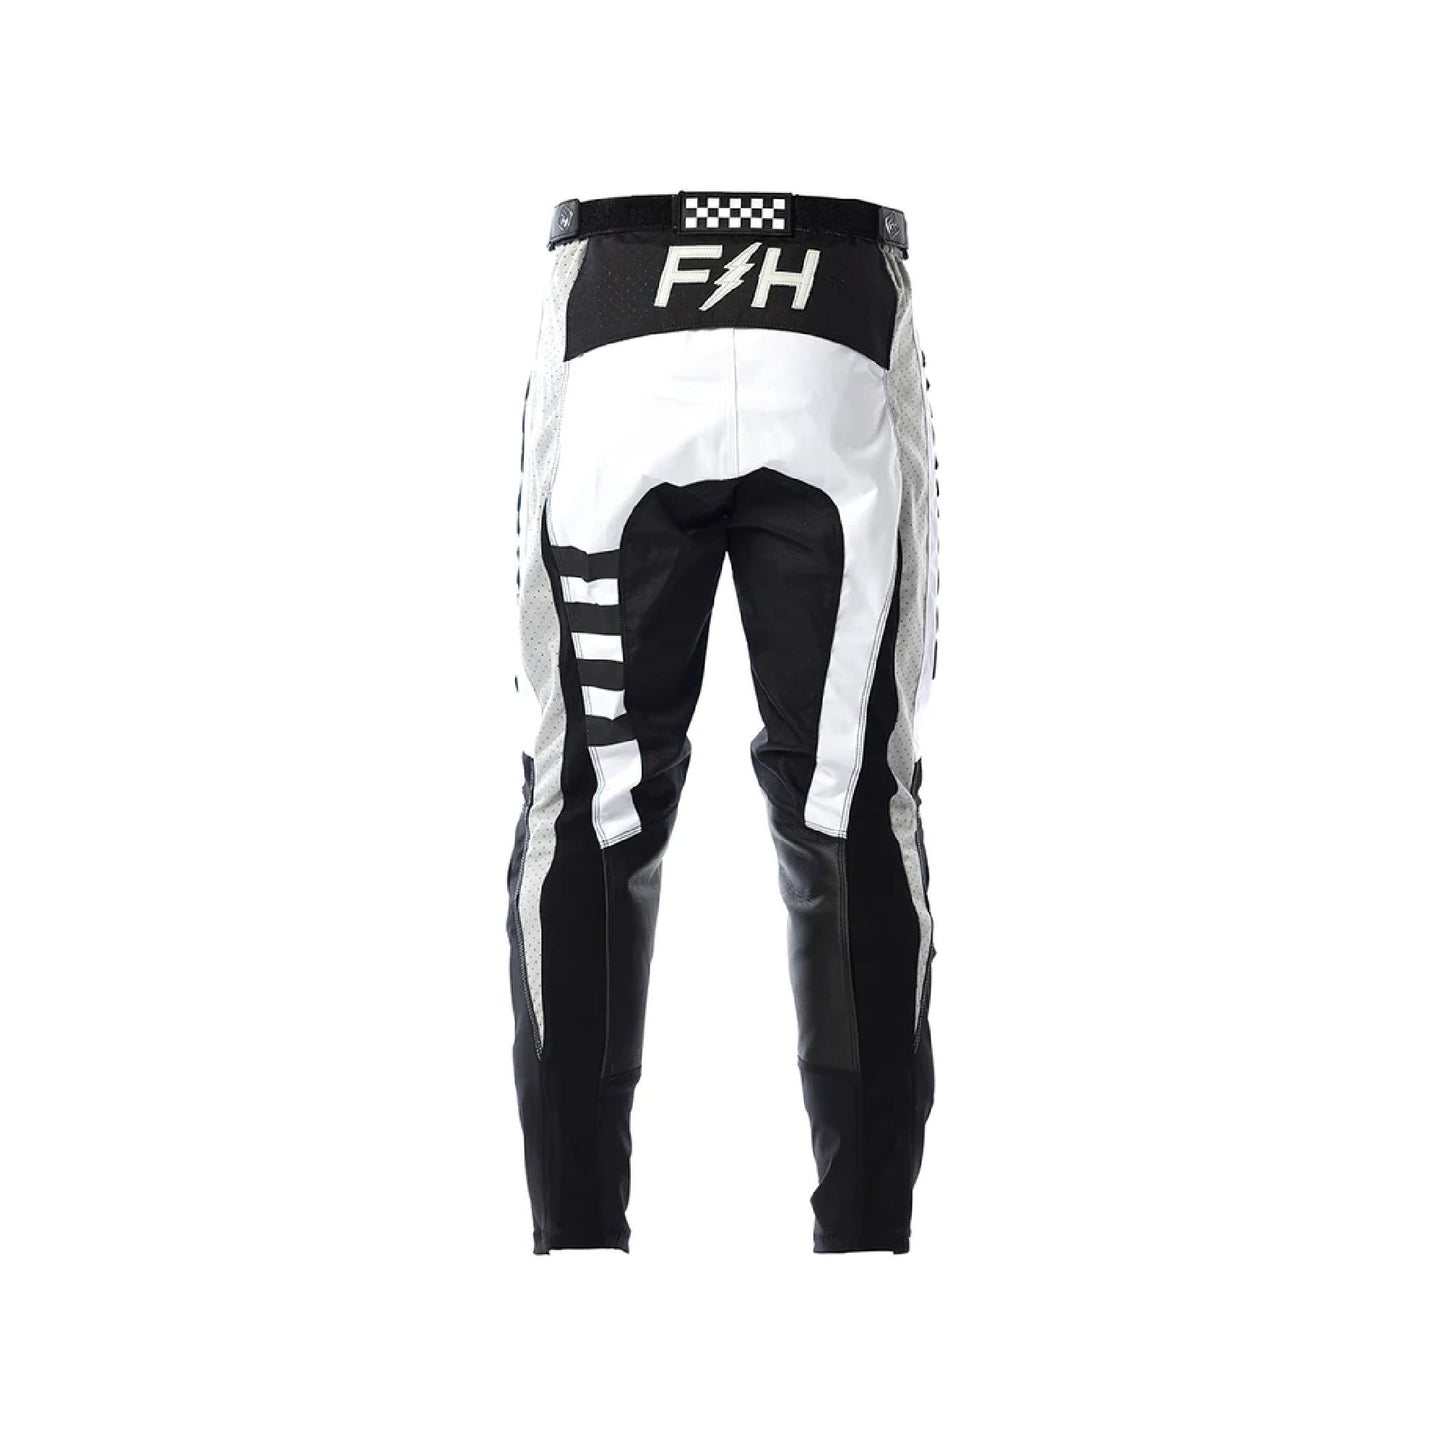 Fasthouse Youth Grindhouse Pants White Black Bike Pants